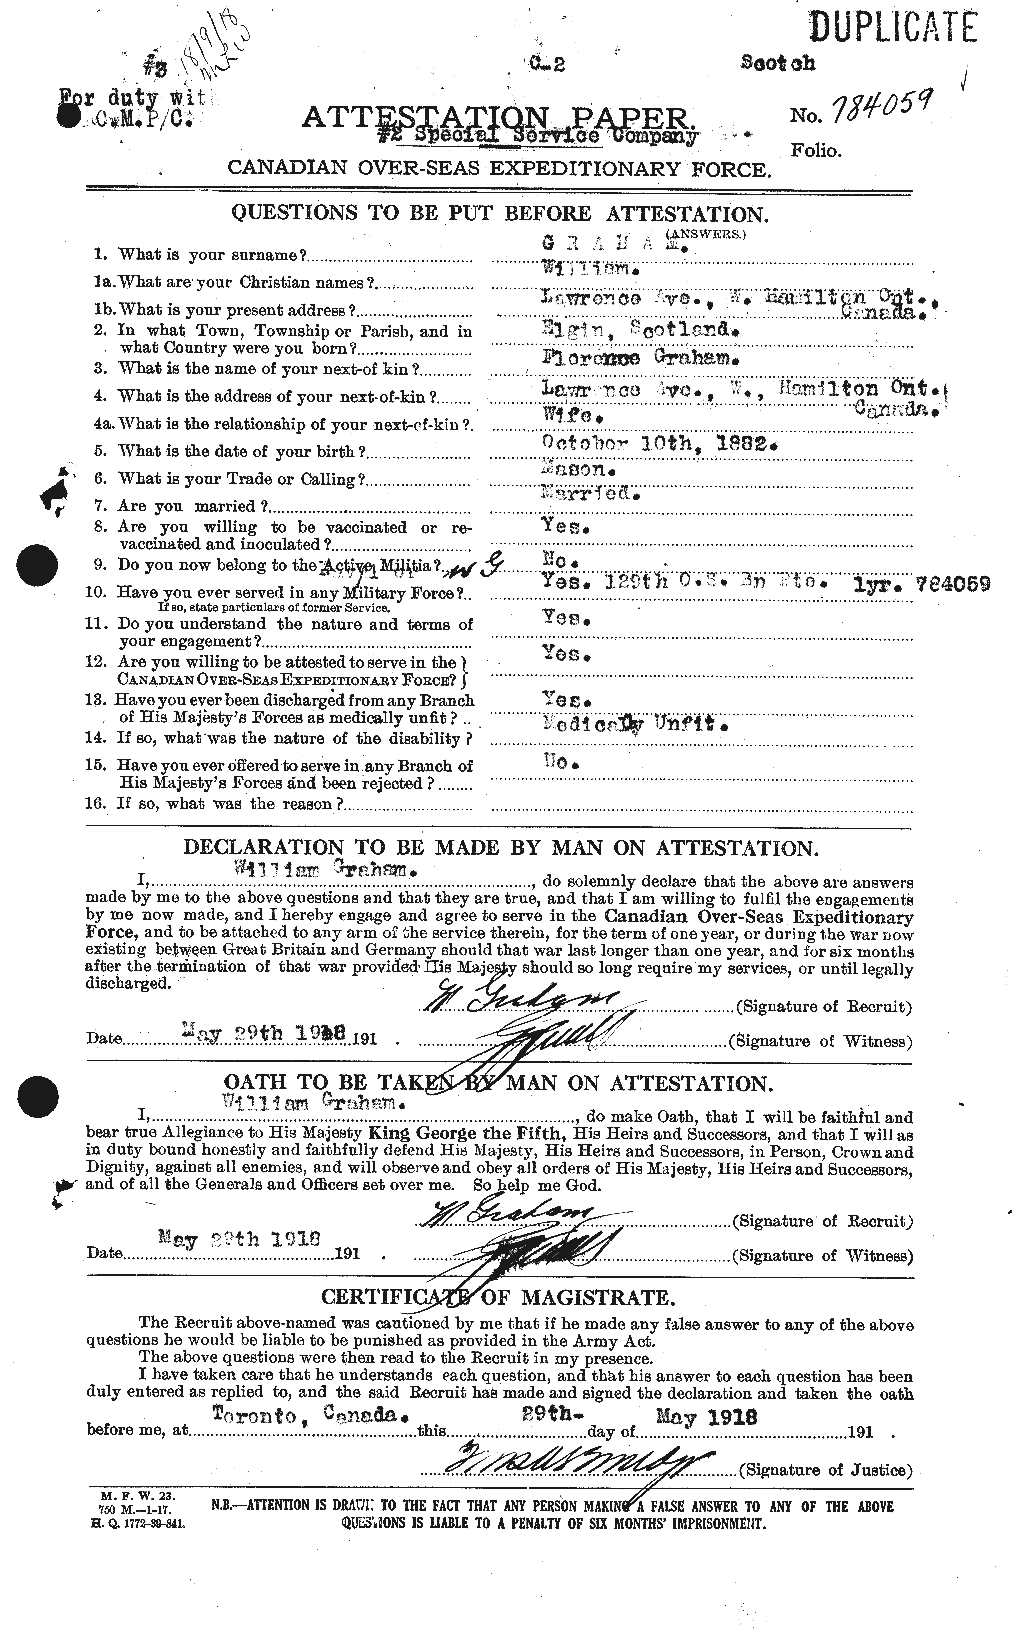 Personnel Records of the First World War - CEF 362699a